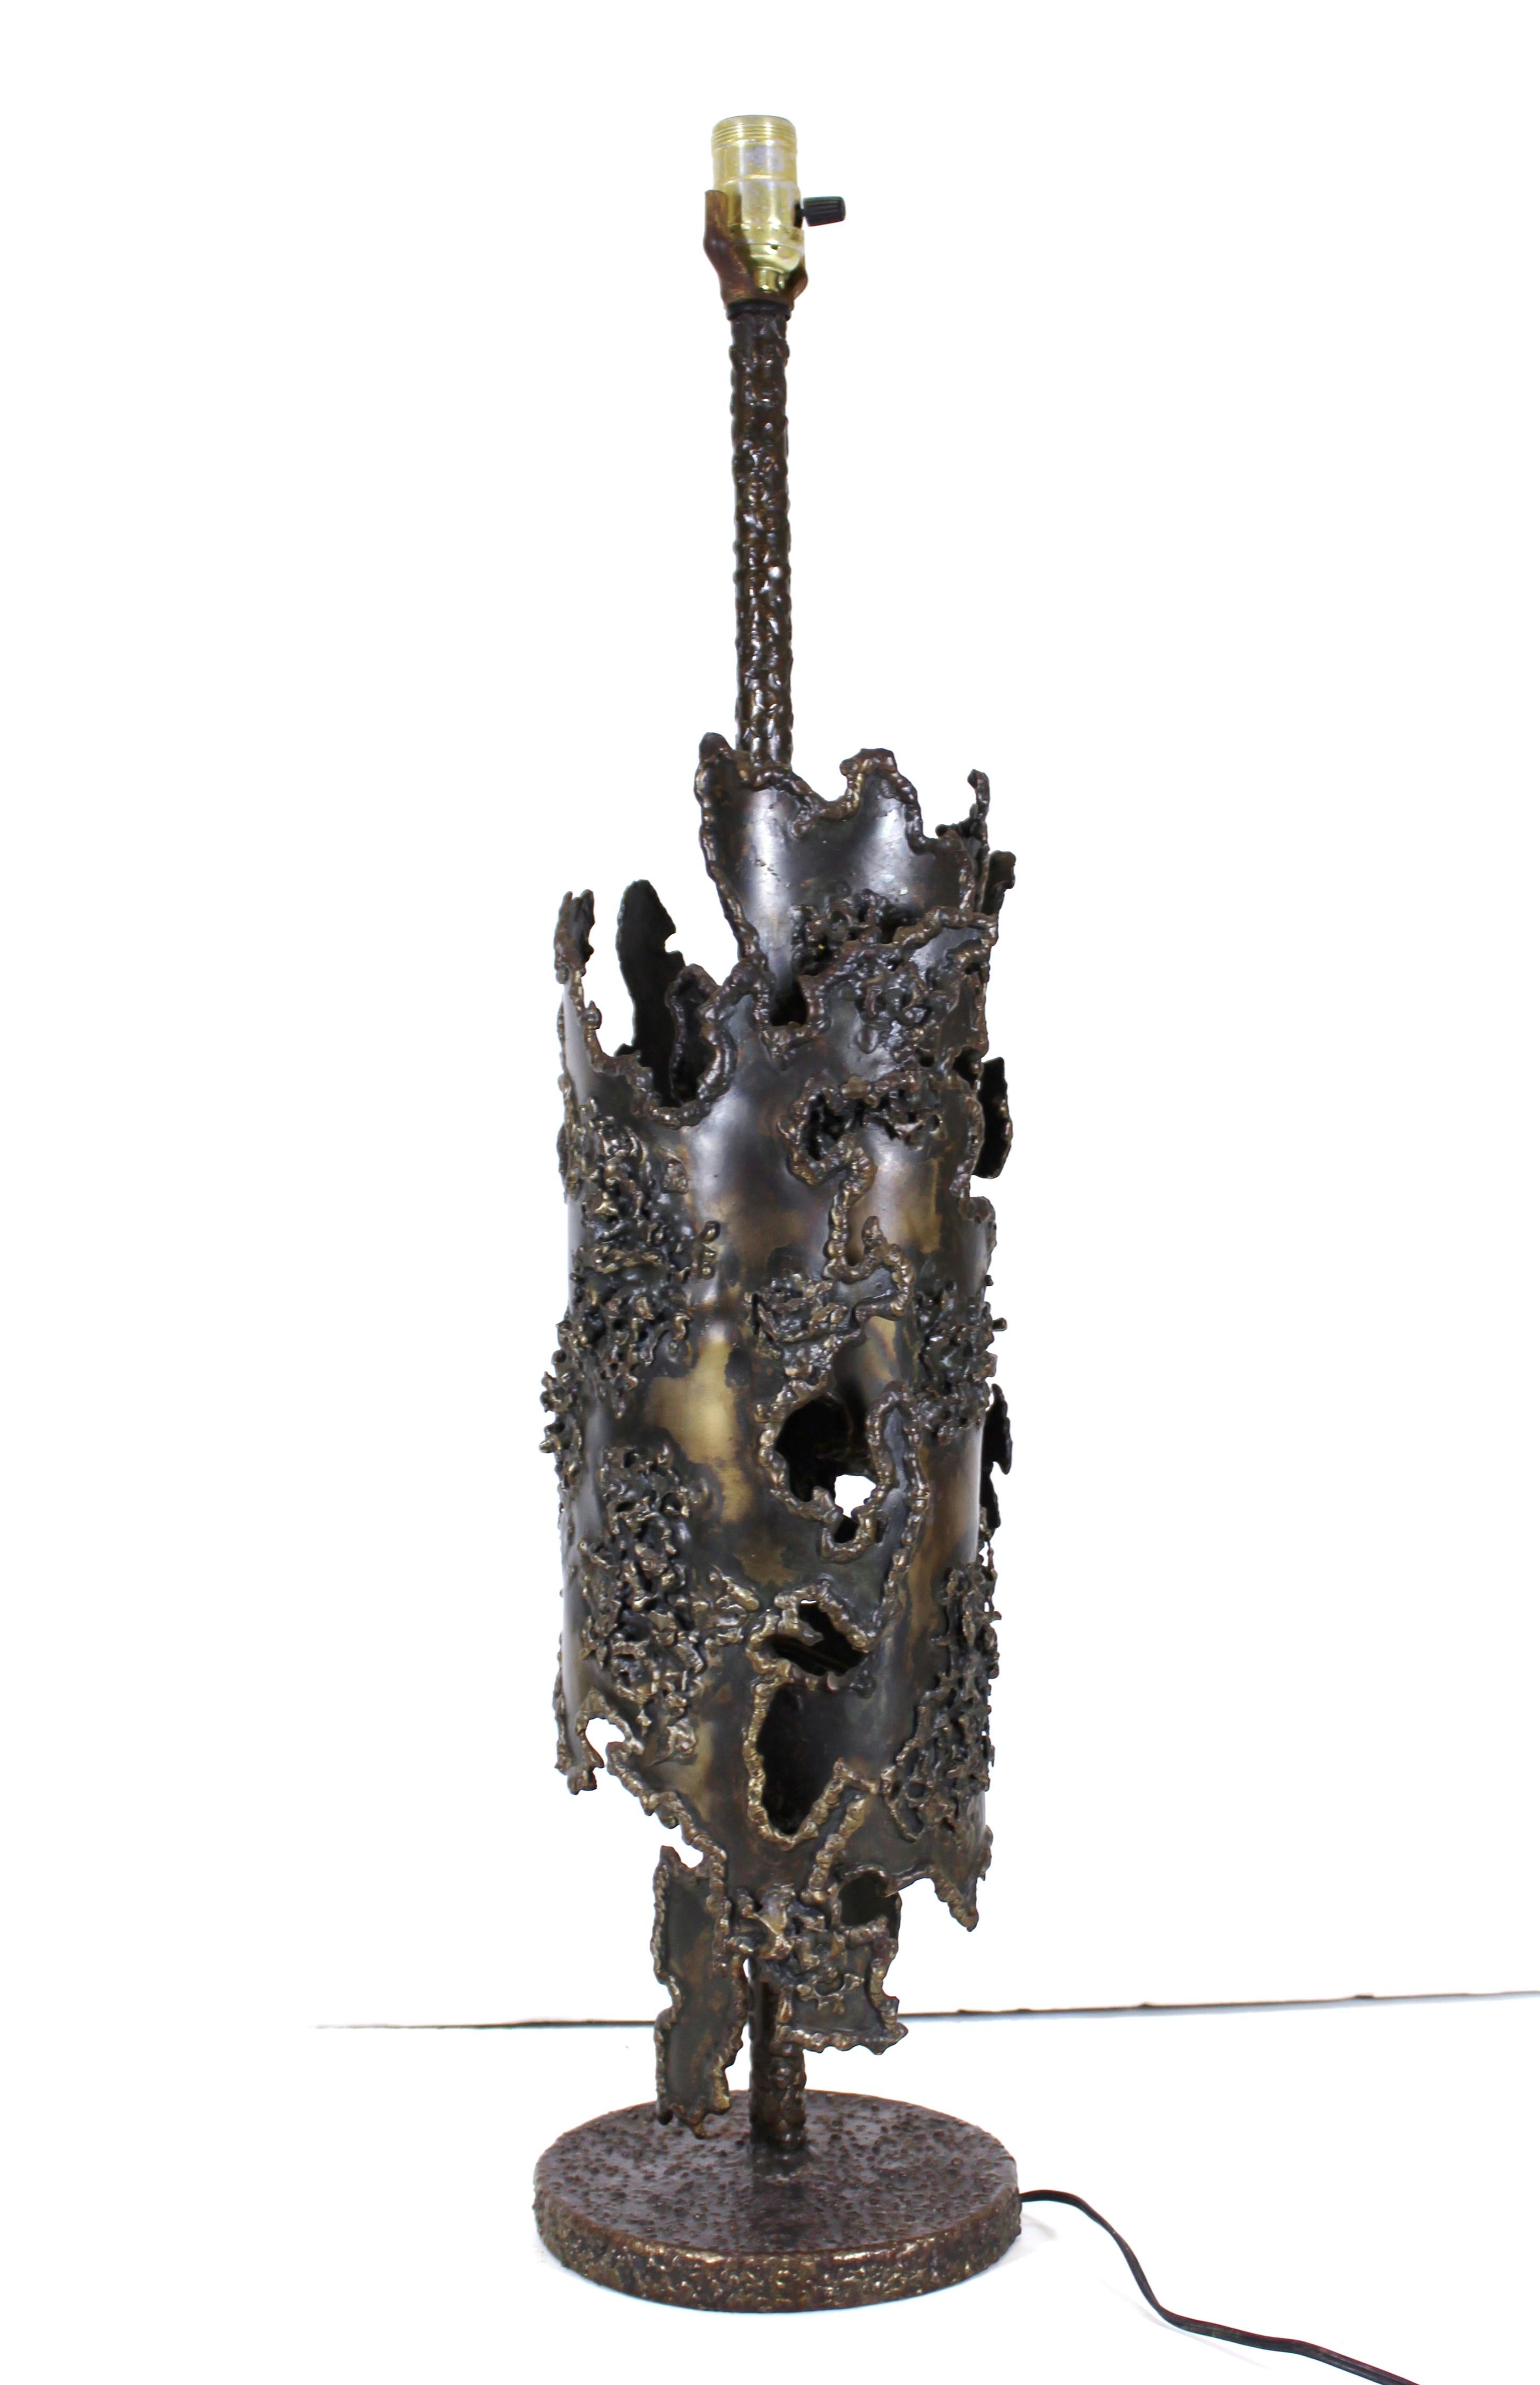 Italian early Brutalist torched wrought bronze and iron table lamp created by Marcello Fantoni. The piece was made during the 1970s and has a substantial weight to it. 